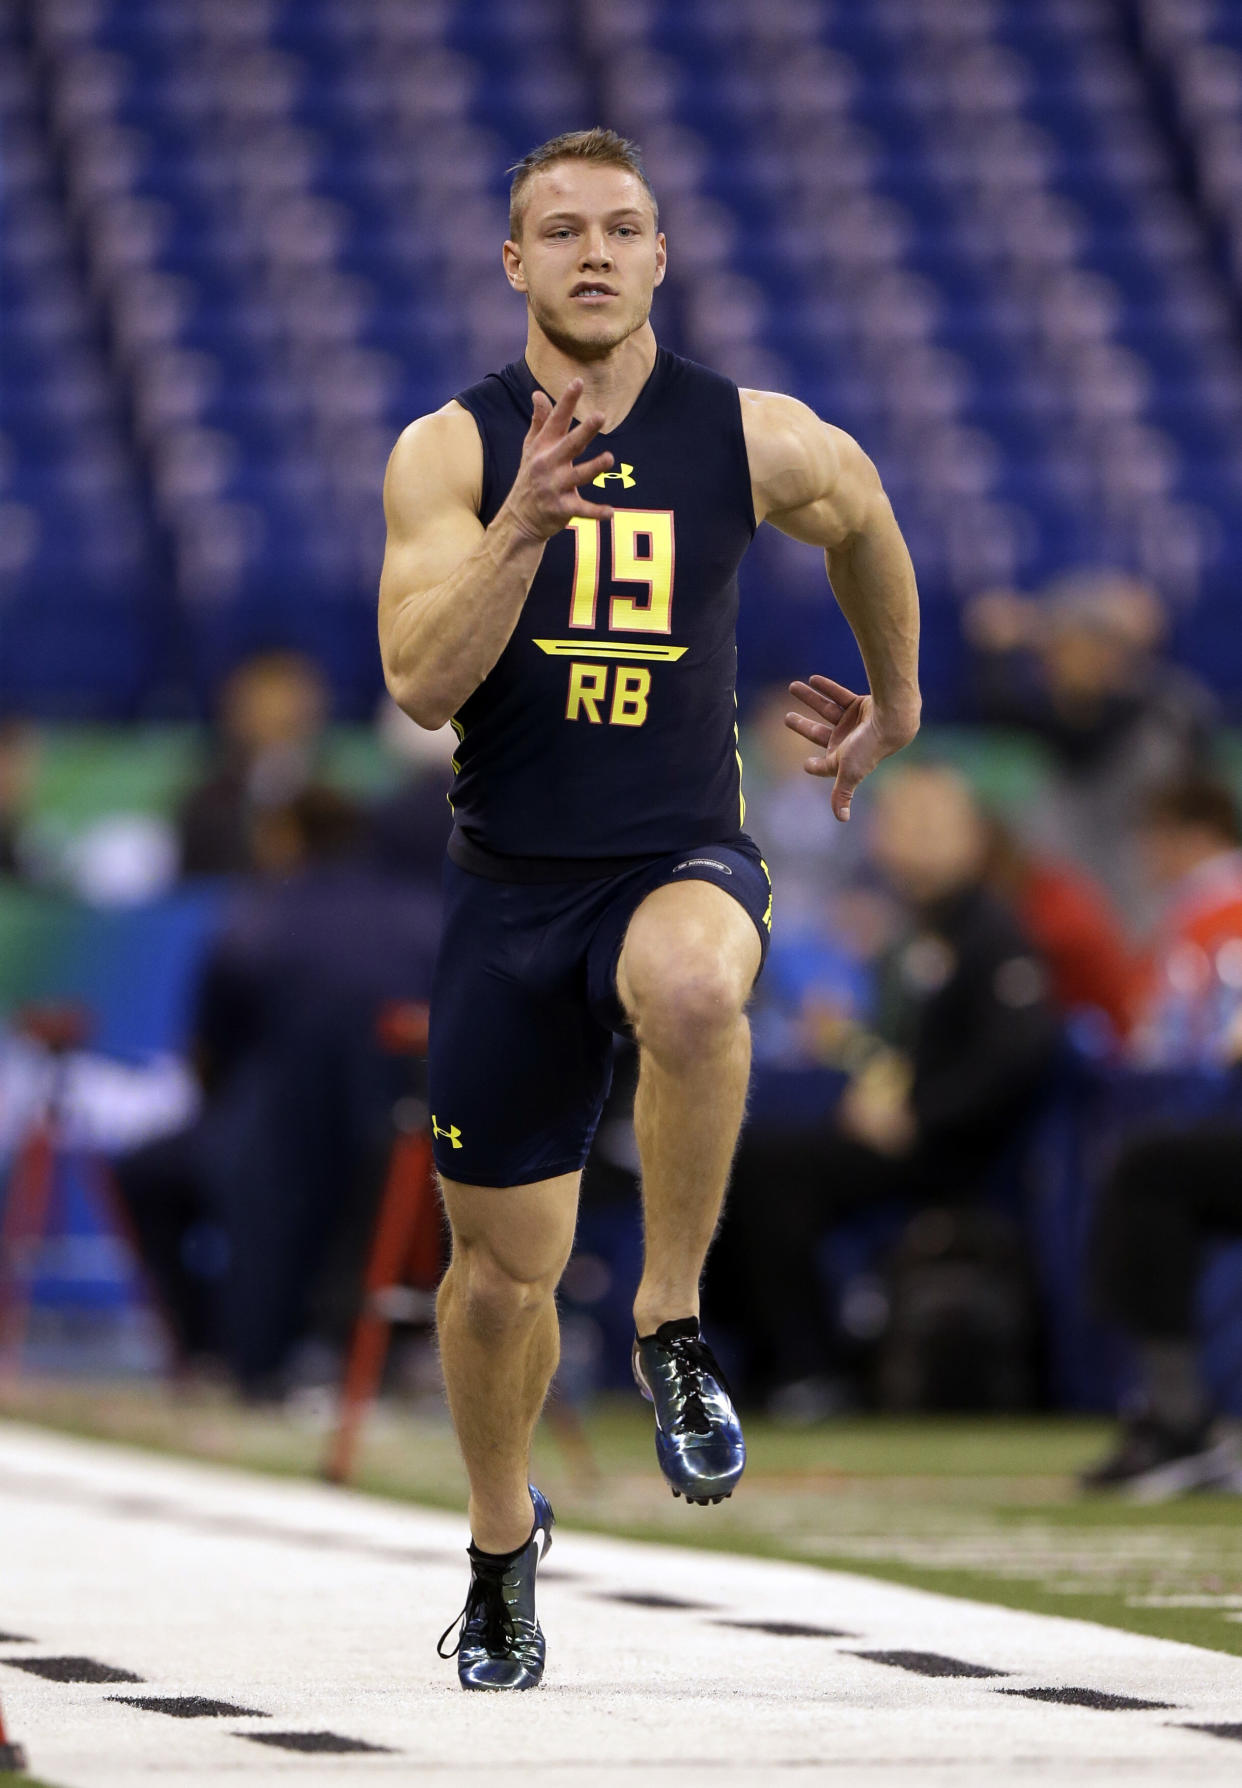 Stanford running back Christian McCaffrey runs the 40-yard dash at the NFL scouting combine in 2017. (AP)